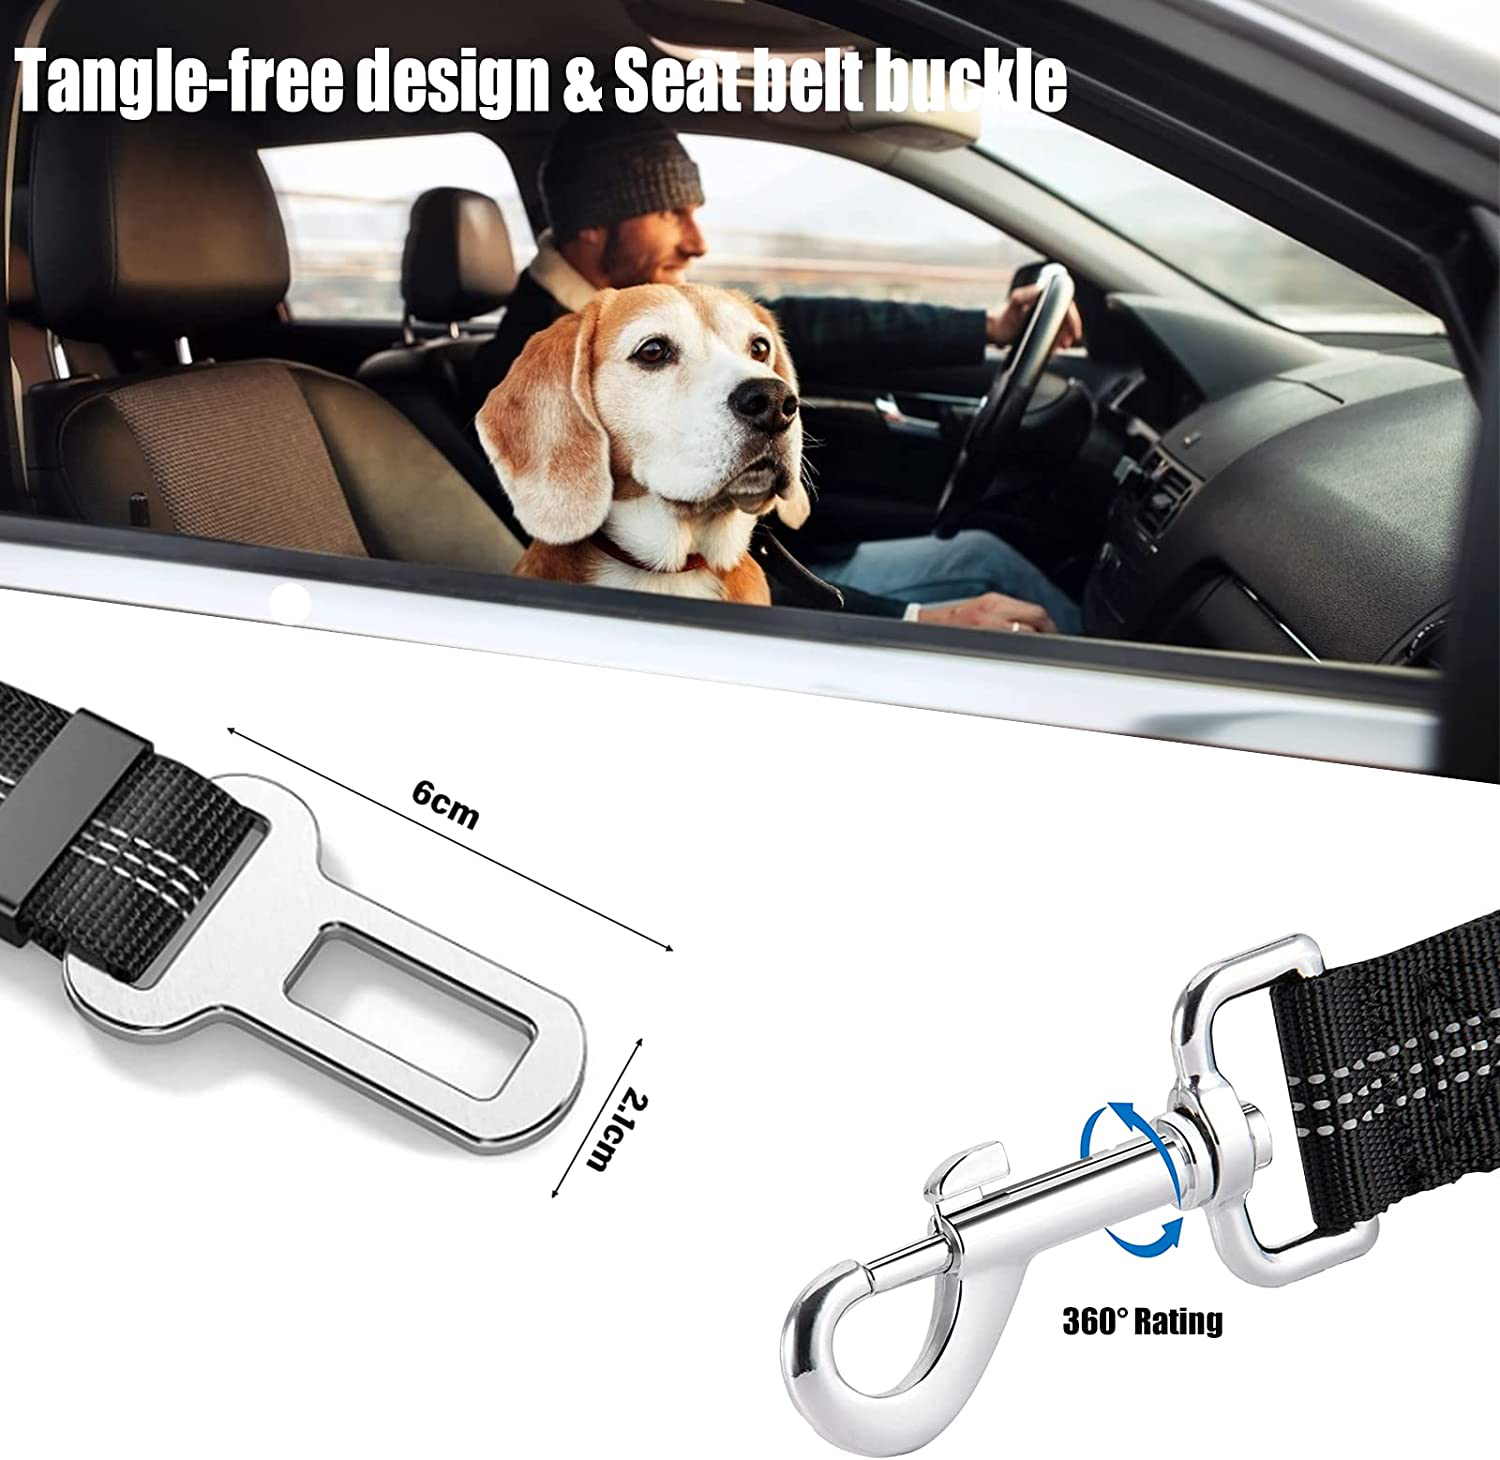 Sixbaola Dog Seat Belt, 2 Pack 2-In-1 Dog Car Seatbelt Headrest Restraint Adjustable Reflective Pet Safety Seat Belt Clip Buckle Tether for Large Medium Small Dogs Animals & Pet Supplies > Pet Supplies > Dog Supplies > Dog Treadmills Sixbaola   